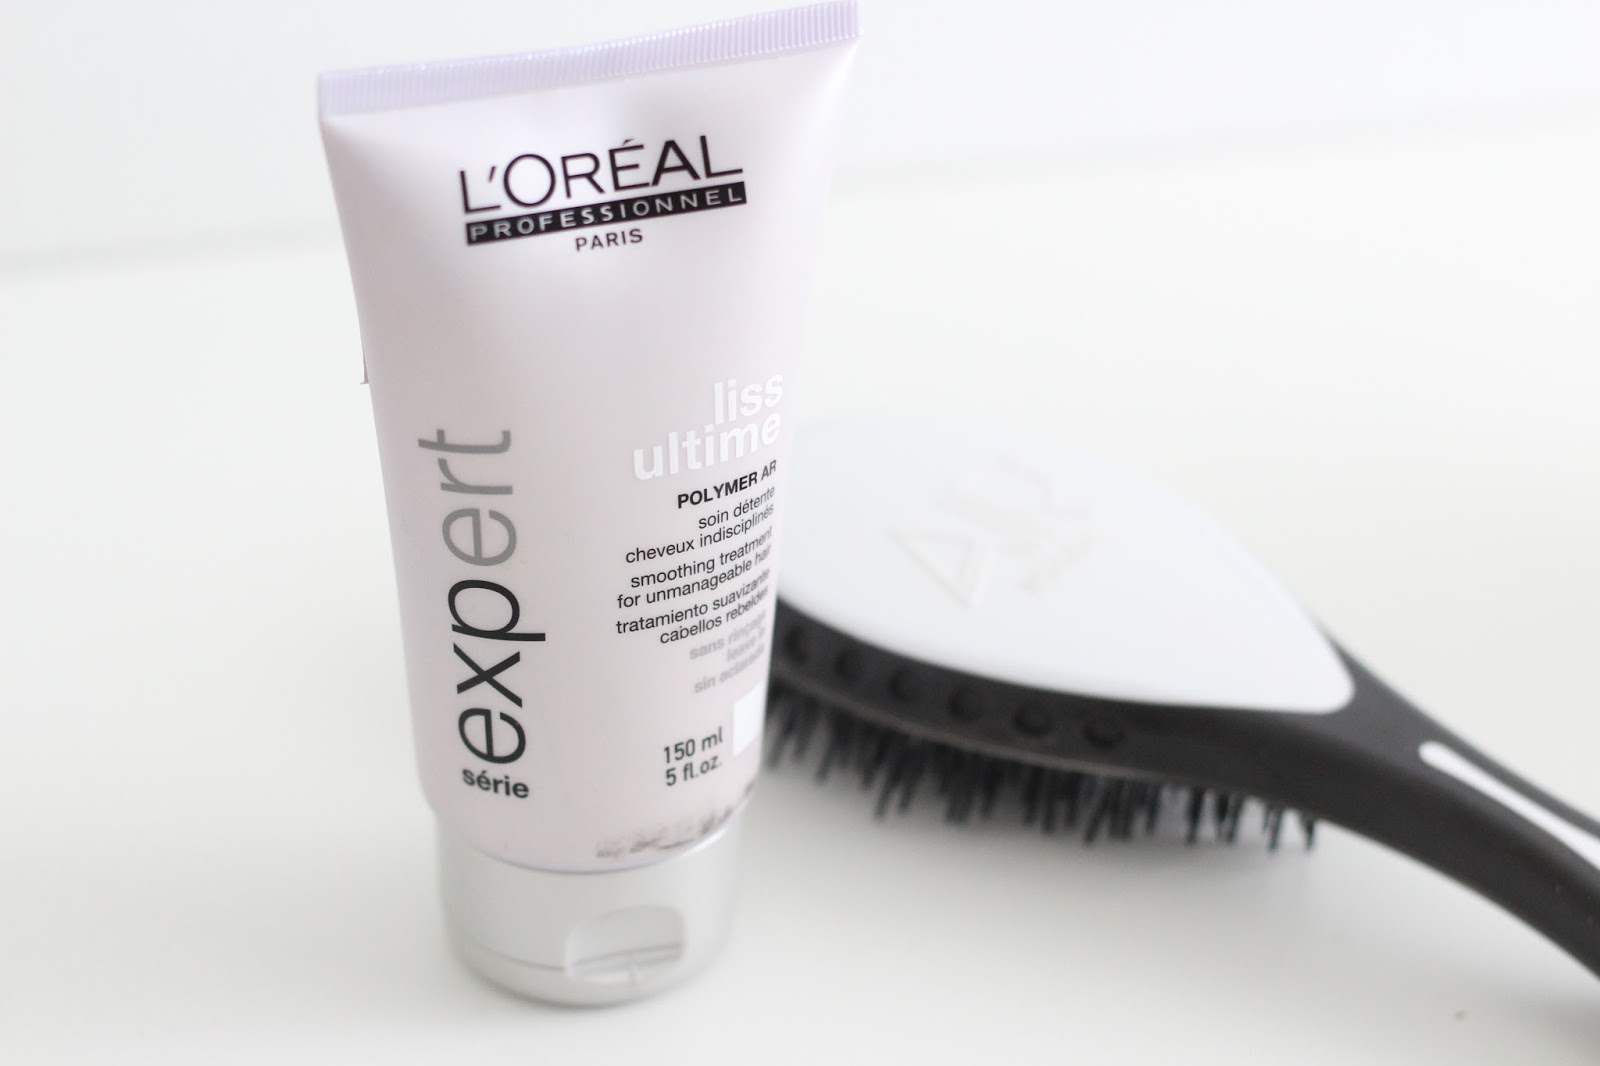 3 steps to properly take care of damaged hair - Quite a Looker Blog Loreal Professionnel shampoo, hair mask and leave-on conditioner review, AirMotion Brush